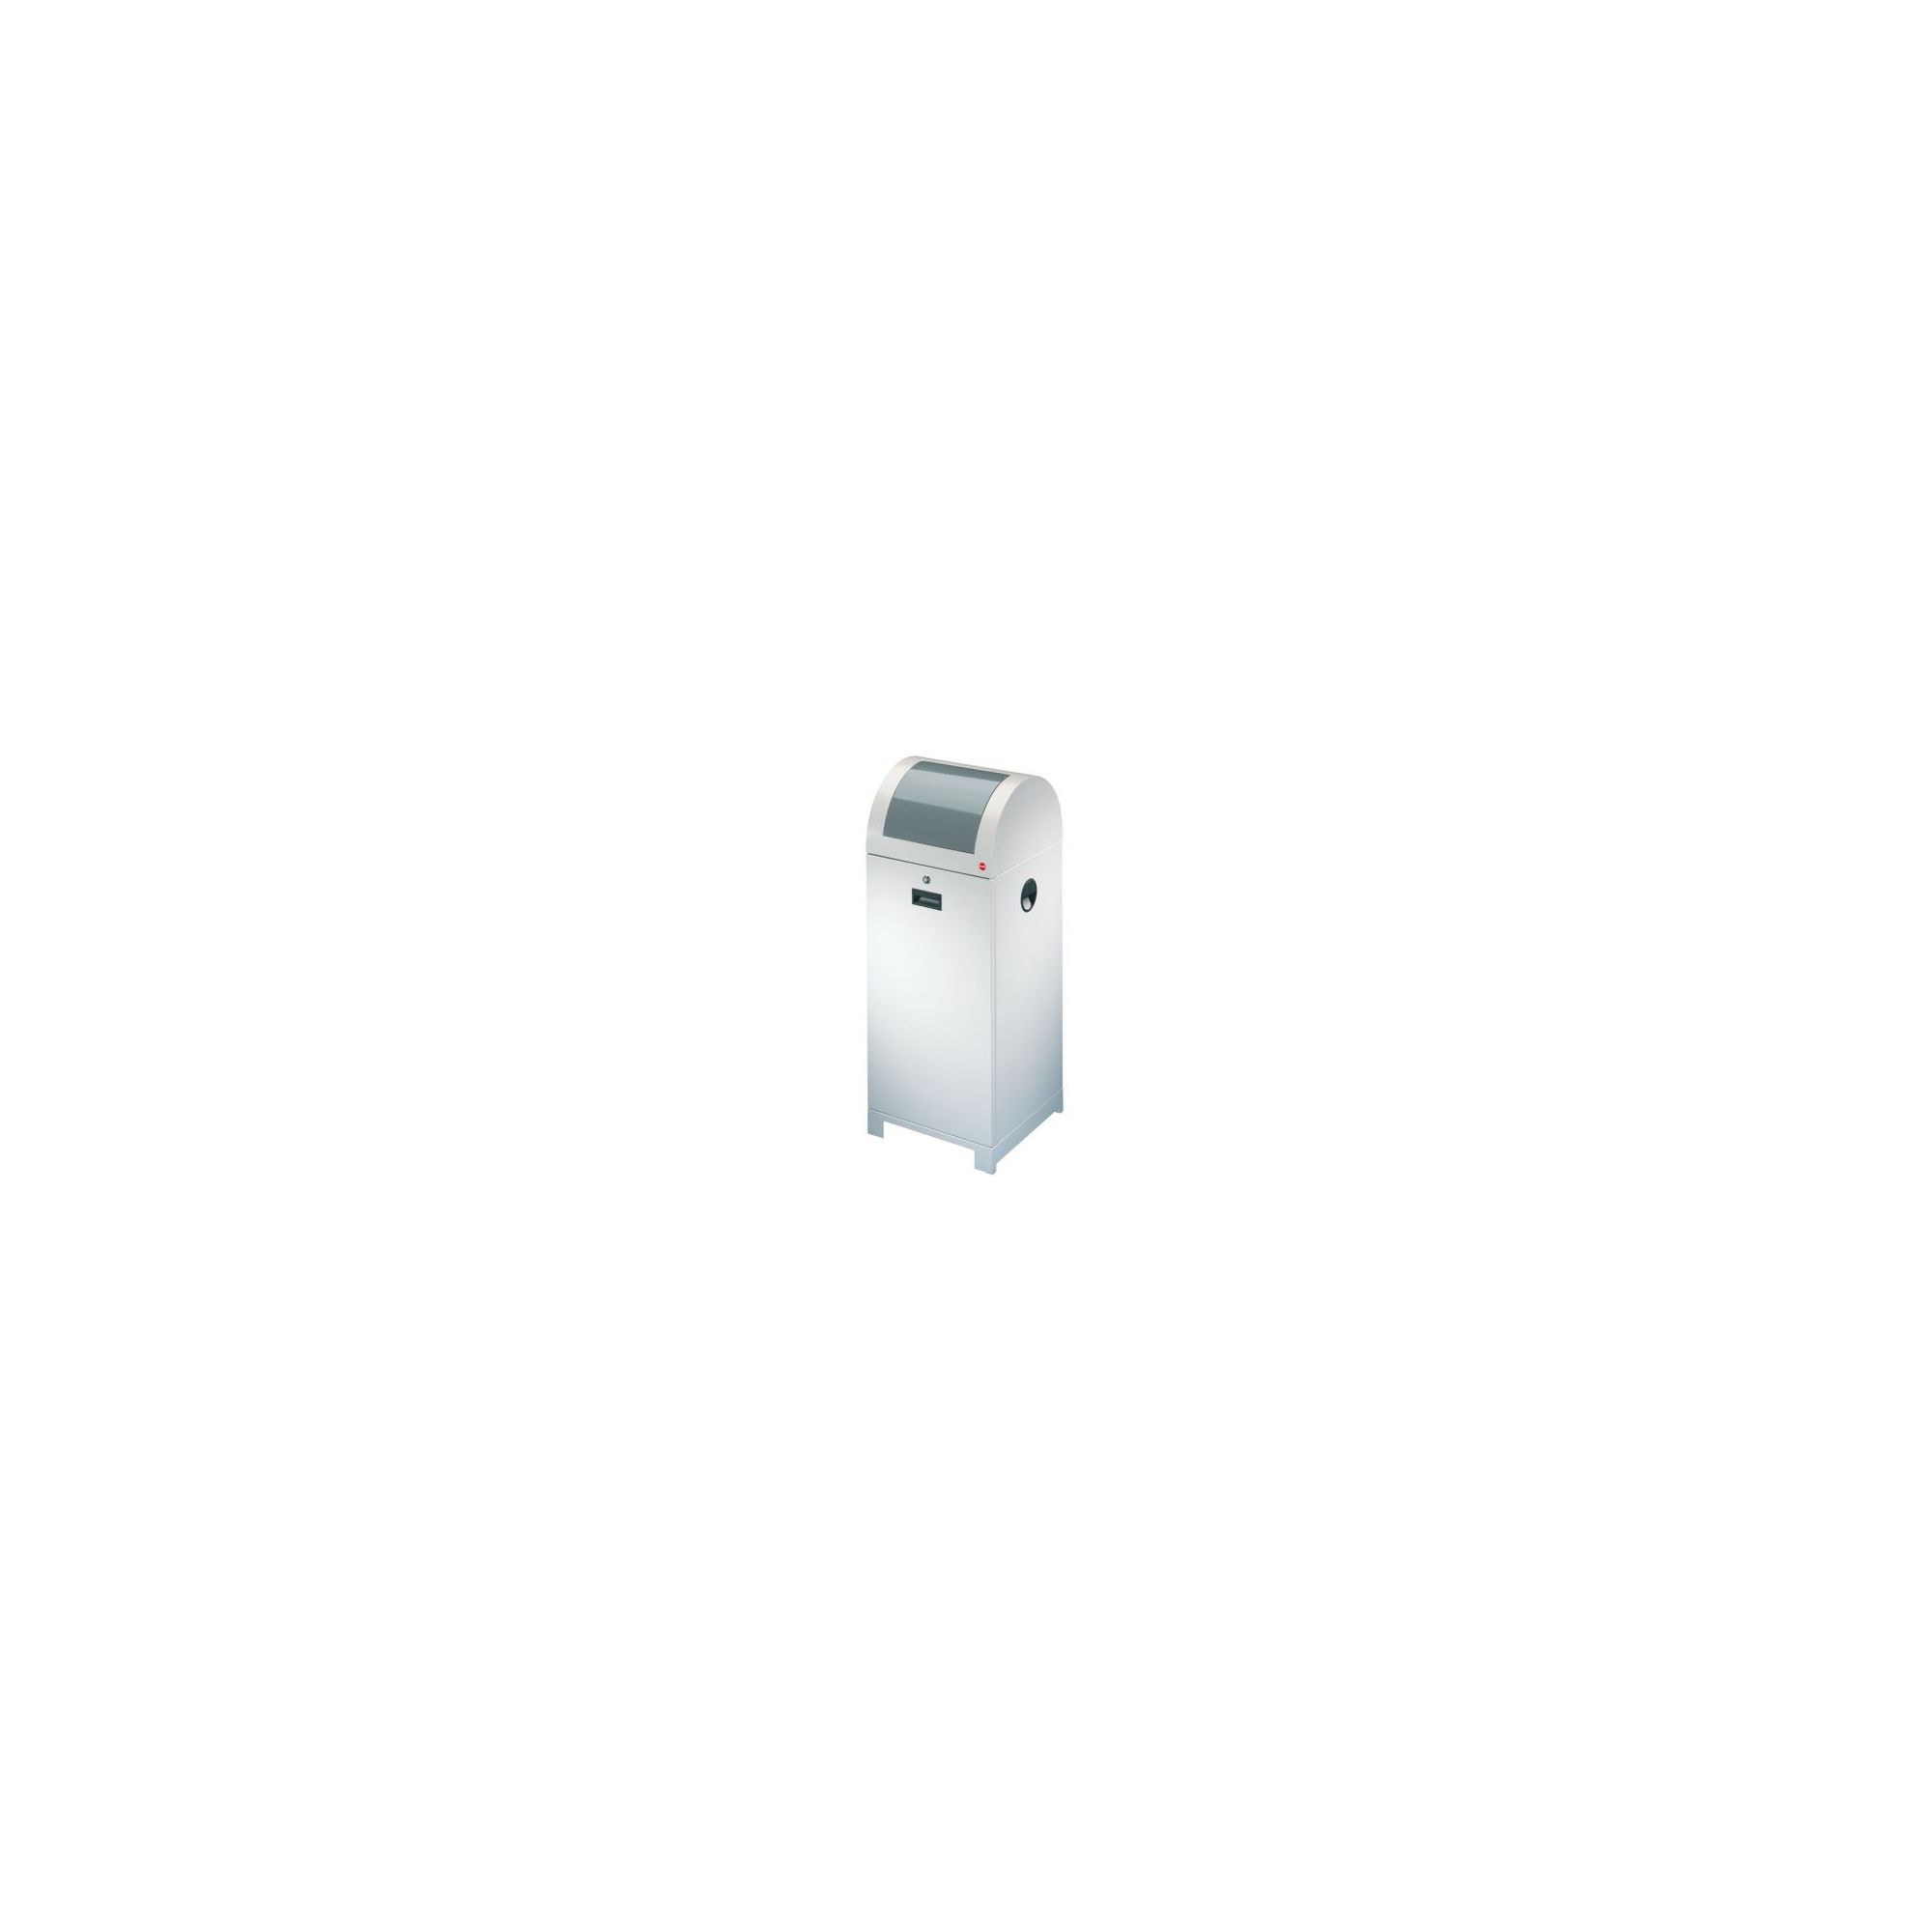 Hailo ProfiLine WSB 70 Recycling and Waste Bin in White Aluminium with Bin Liner Holder at Tesco Direct